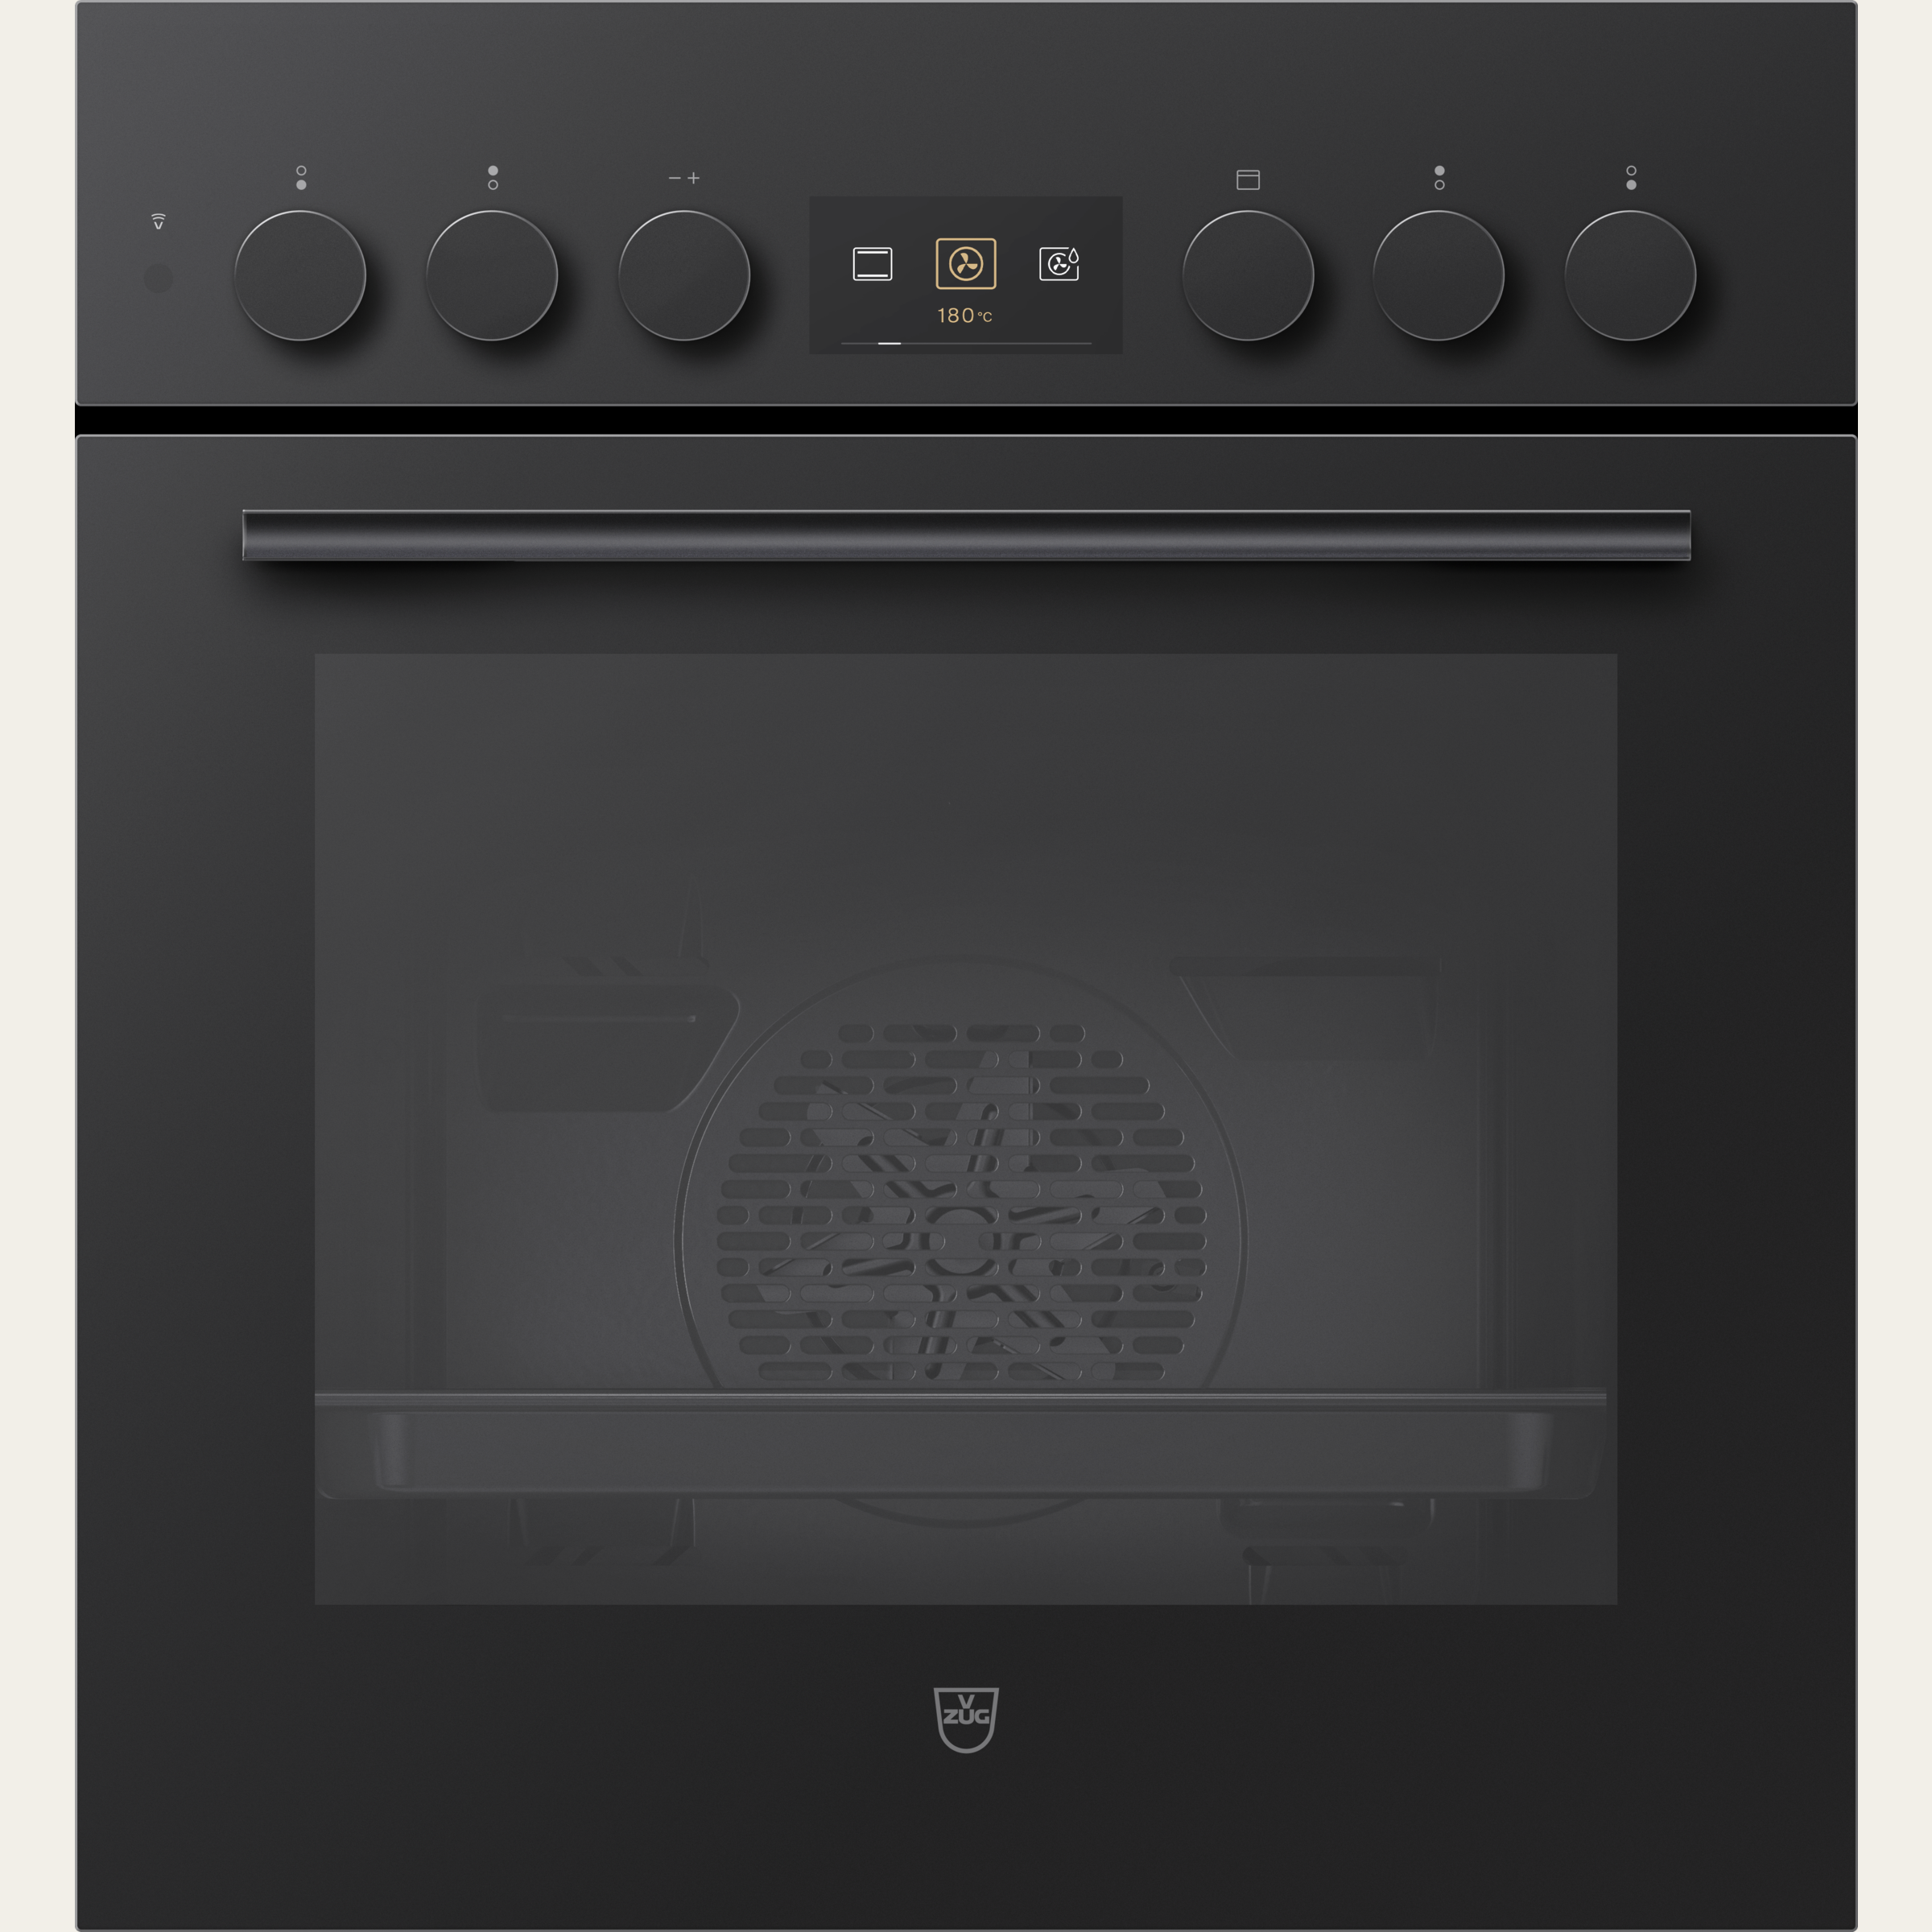 V-ZUG Cooker Combair V600 6UHC, Standard width: 55 cm, Standard height: 60 cm, Nero with glass, Handle: Nero, dial, V-ZUG-Home, TopClean, Number of controllable cooking zones: 4, 400V